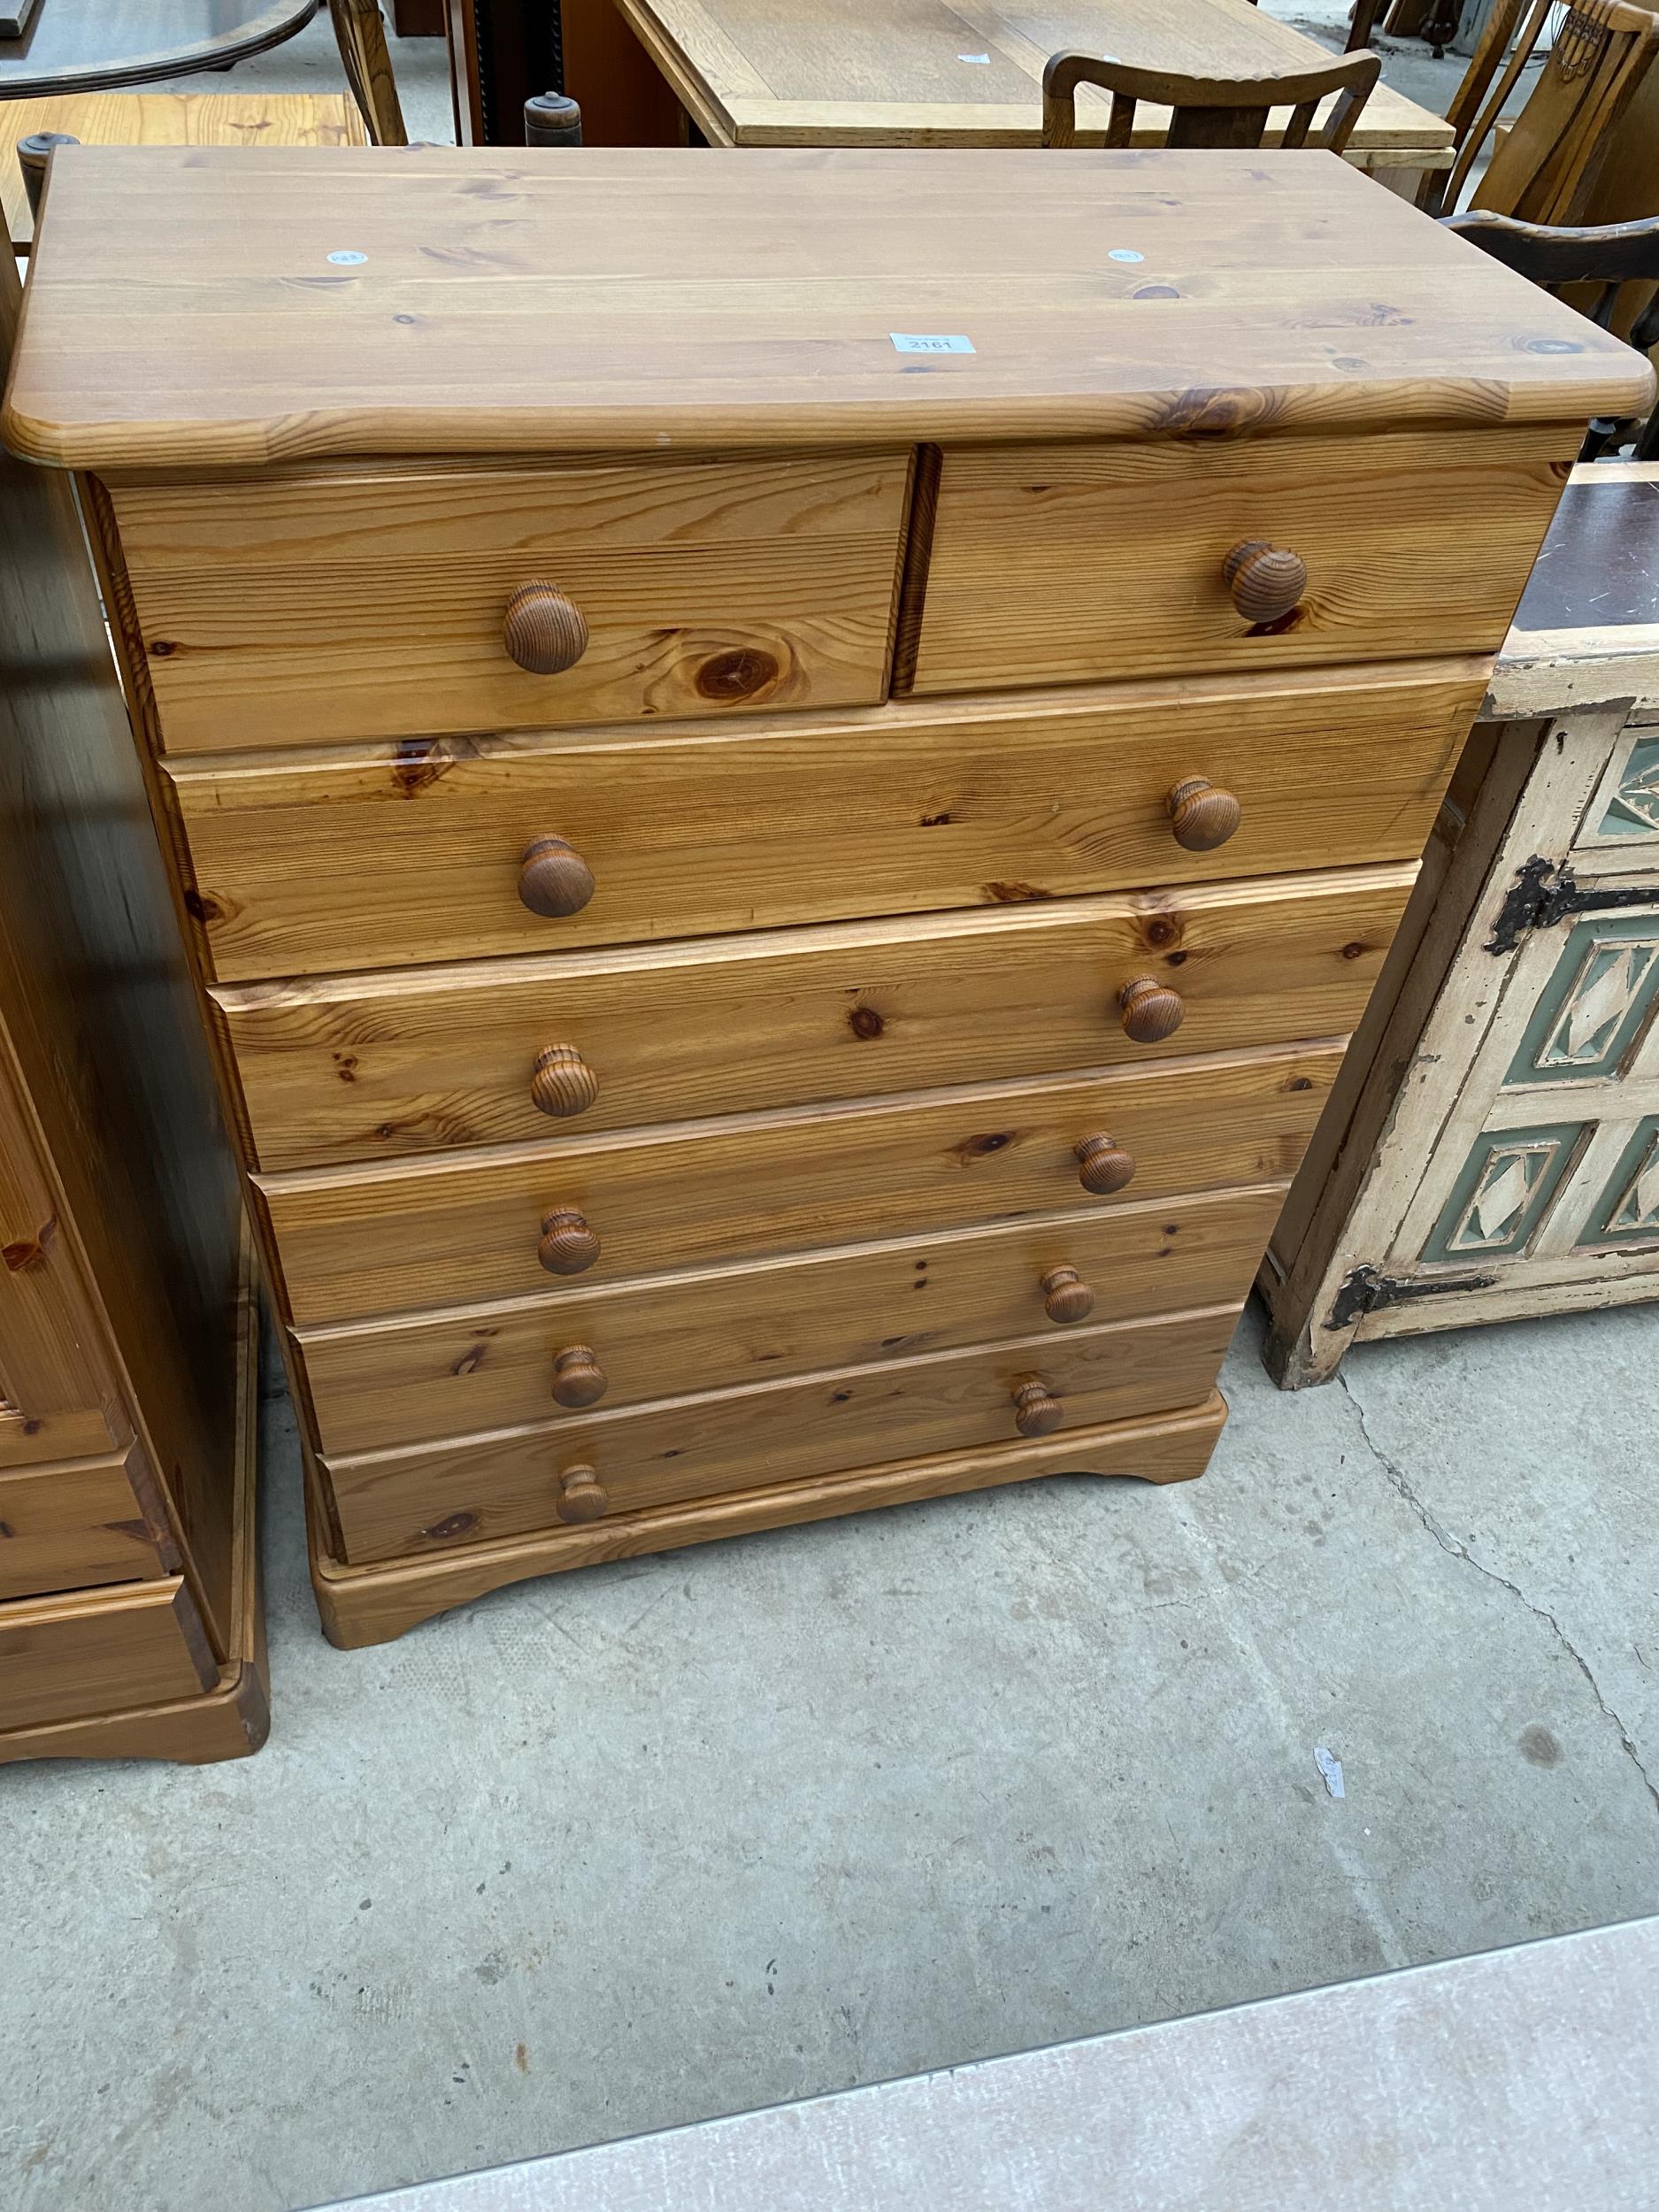 A MODERN PINE CHEST OF TWO SHORT AND FIVE LONG DRAWERS, 31.5" WIDE